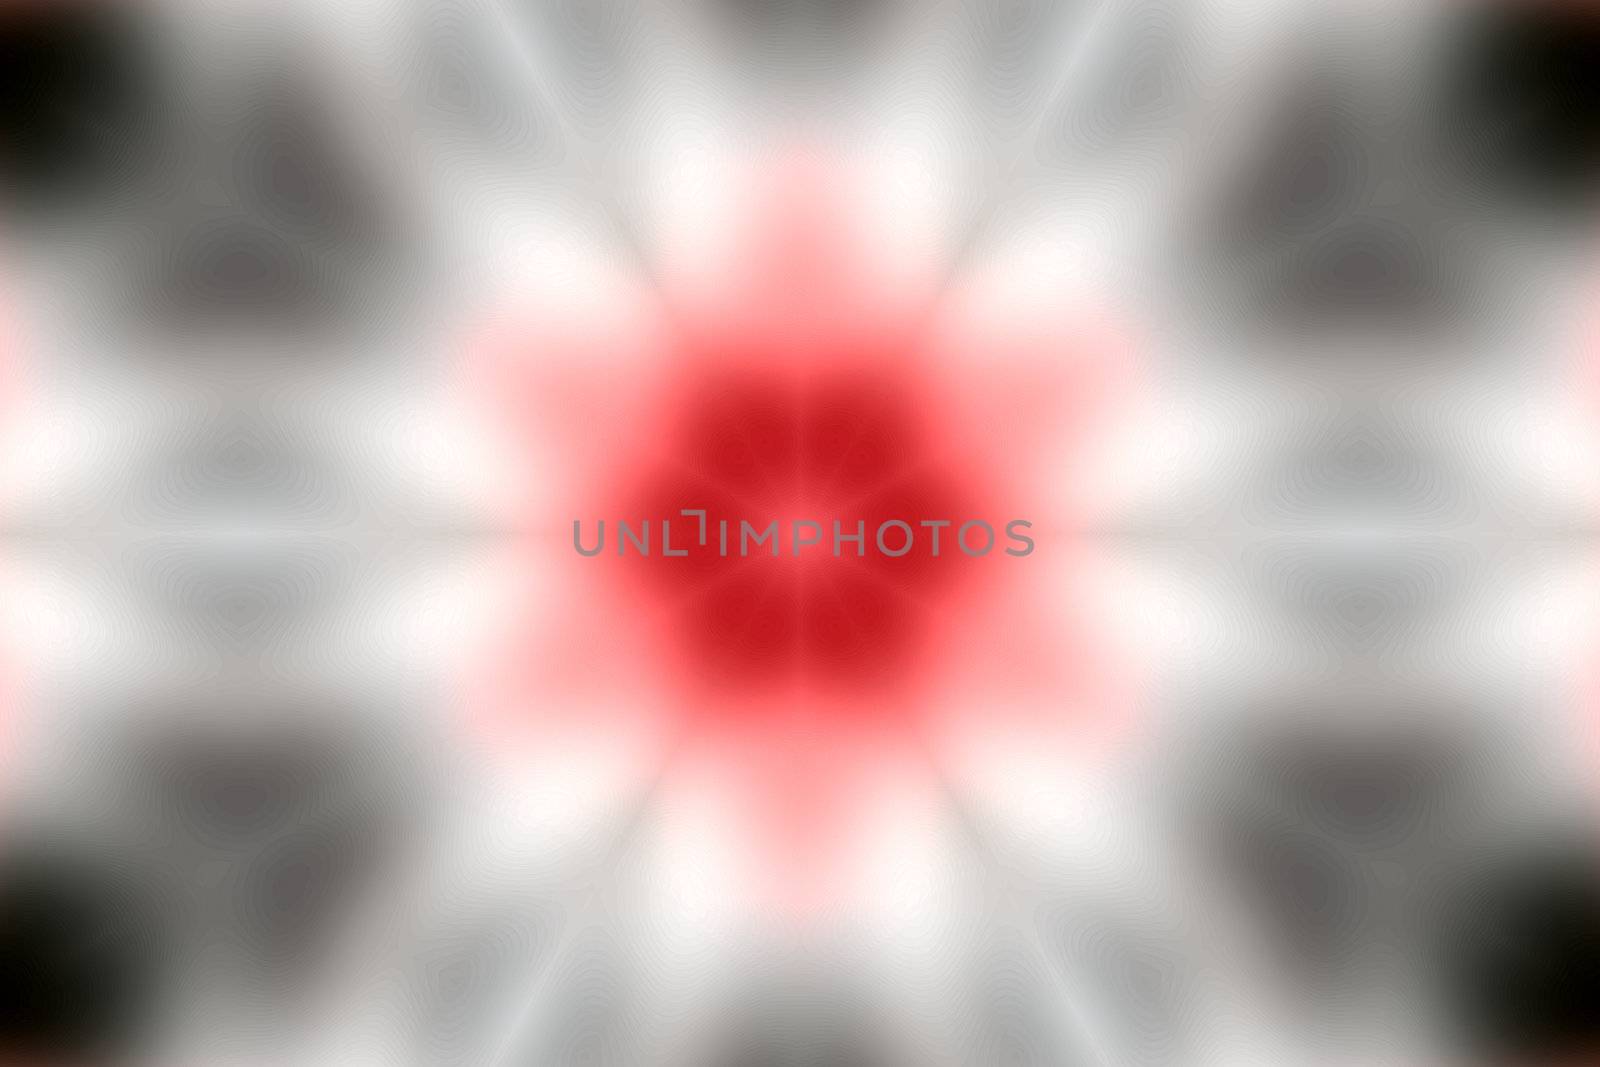 blurry flower effect background in grey and reds